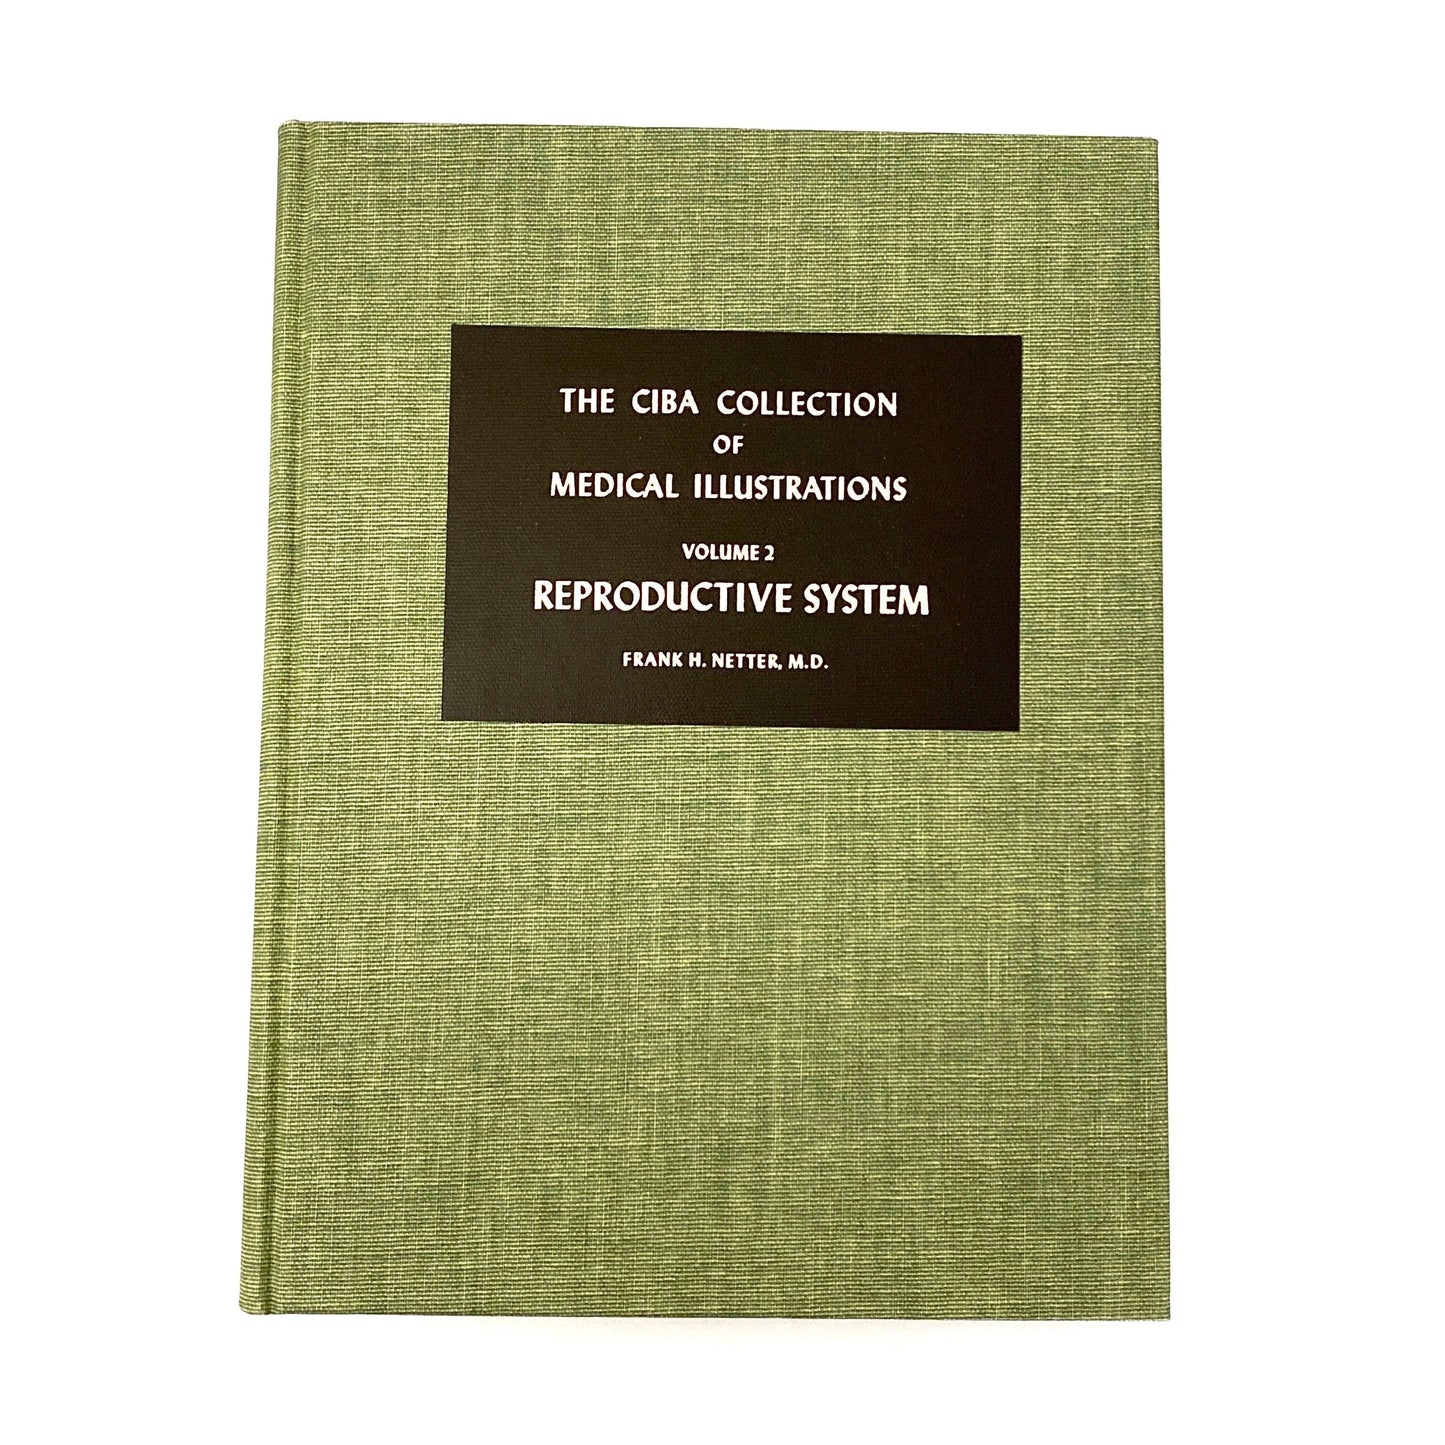 The Ciba Collection of Medical Illustrations Vol. 2 Reproductive System By Frank H. Netter. M.D 1953 Hard Back Book